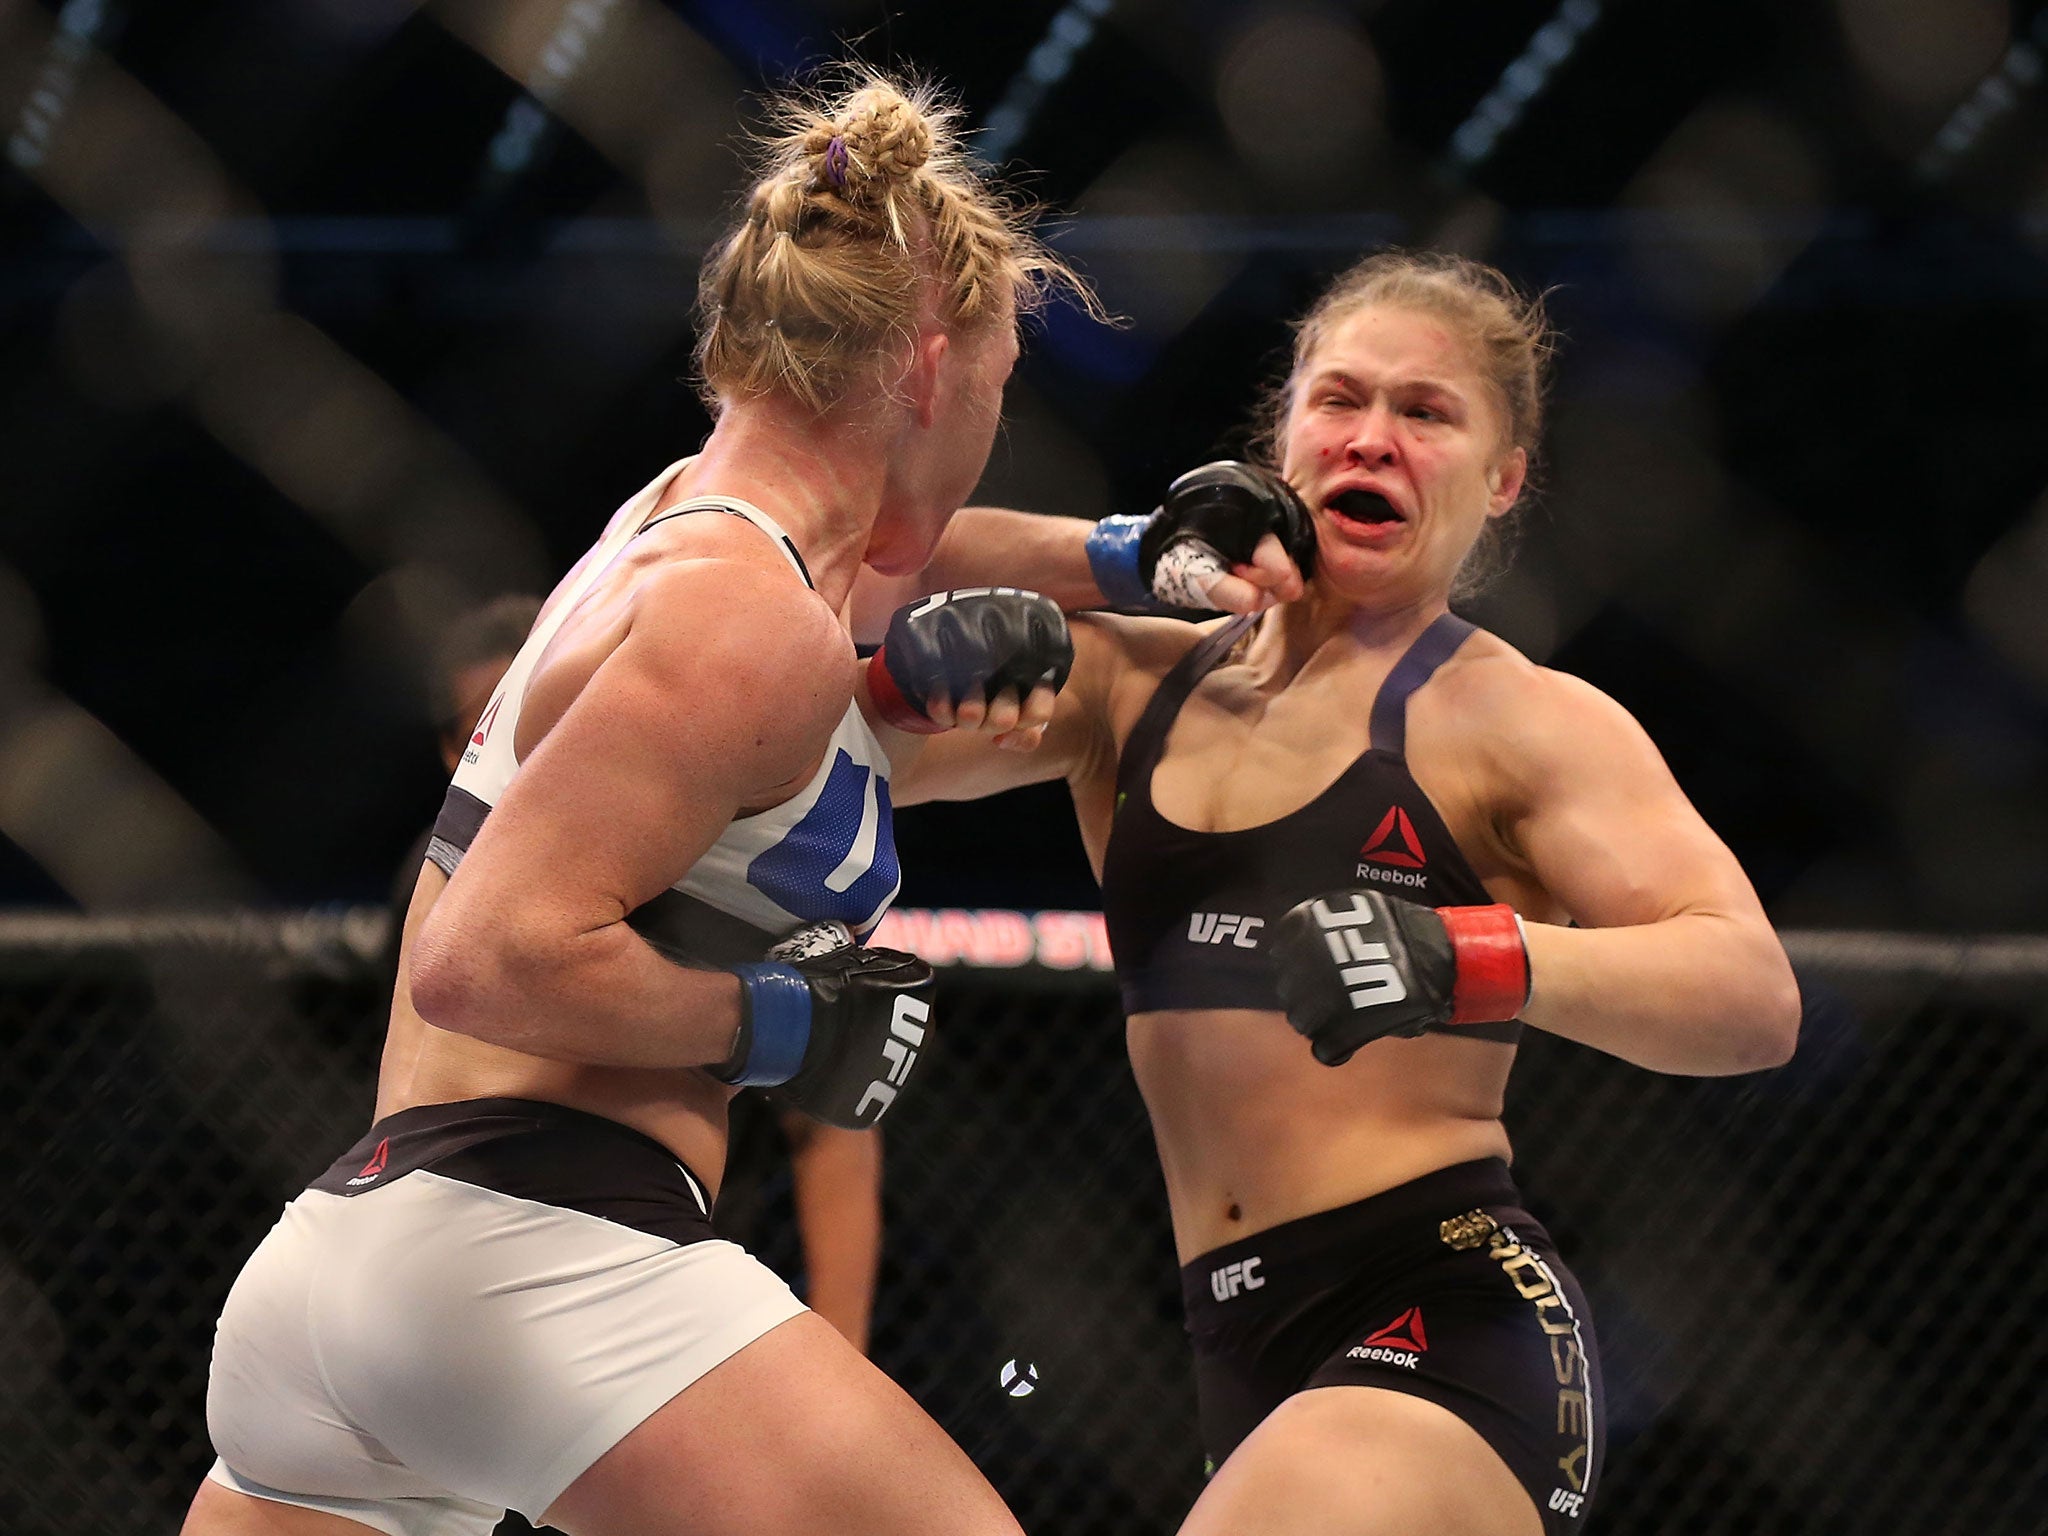 Holly Holm catches Ronda Rousey with a left hook